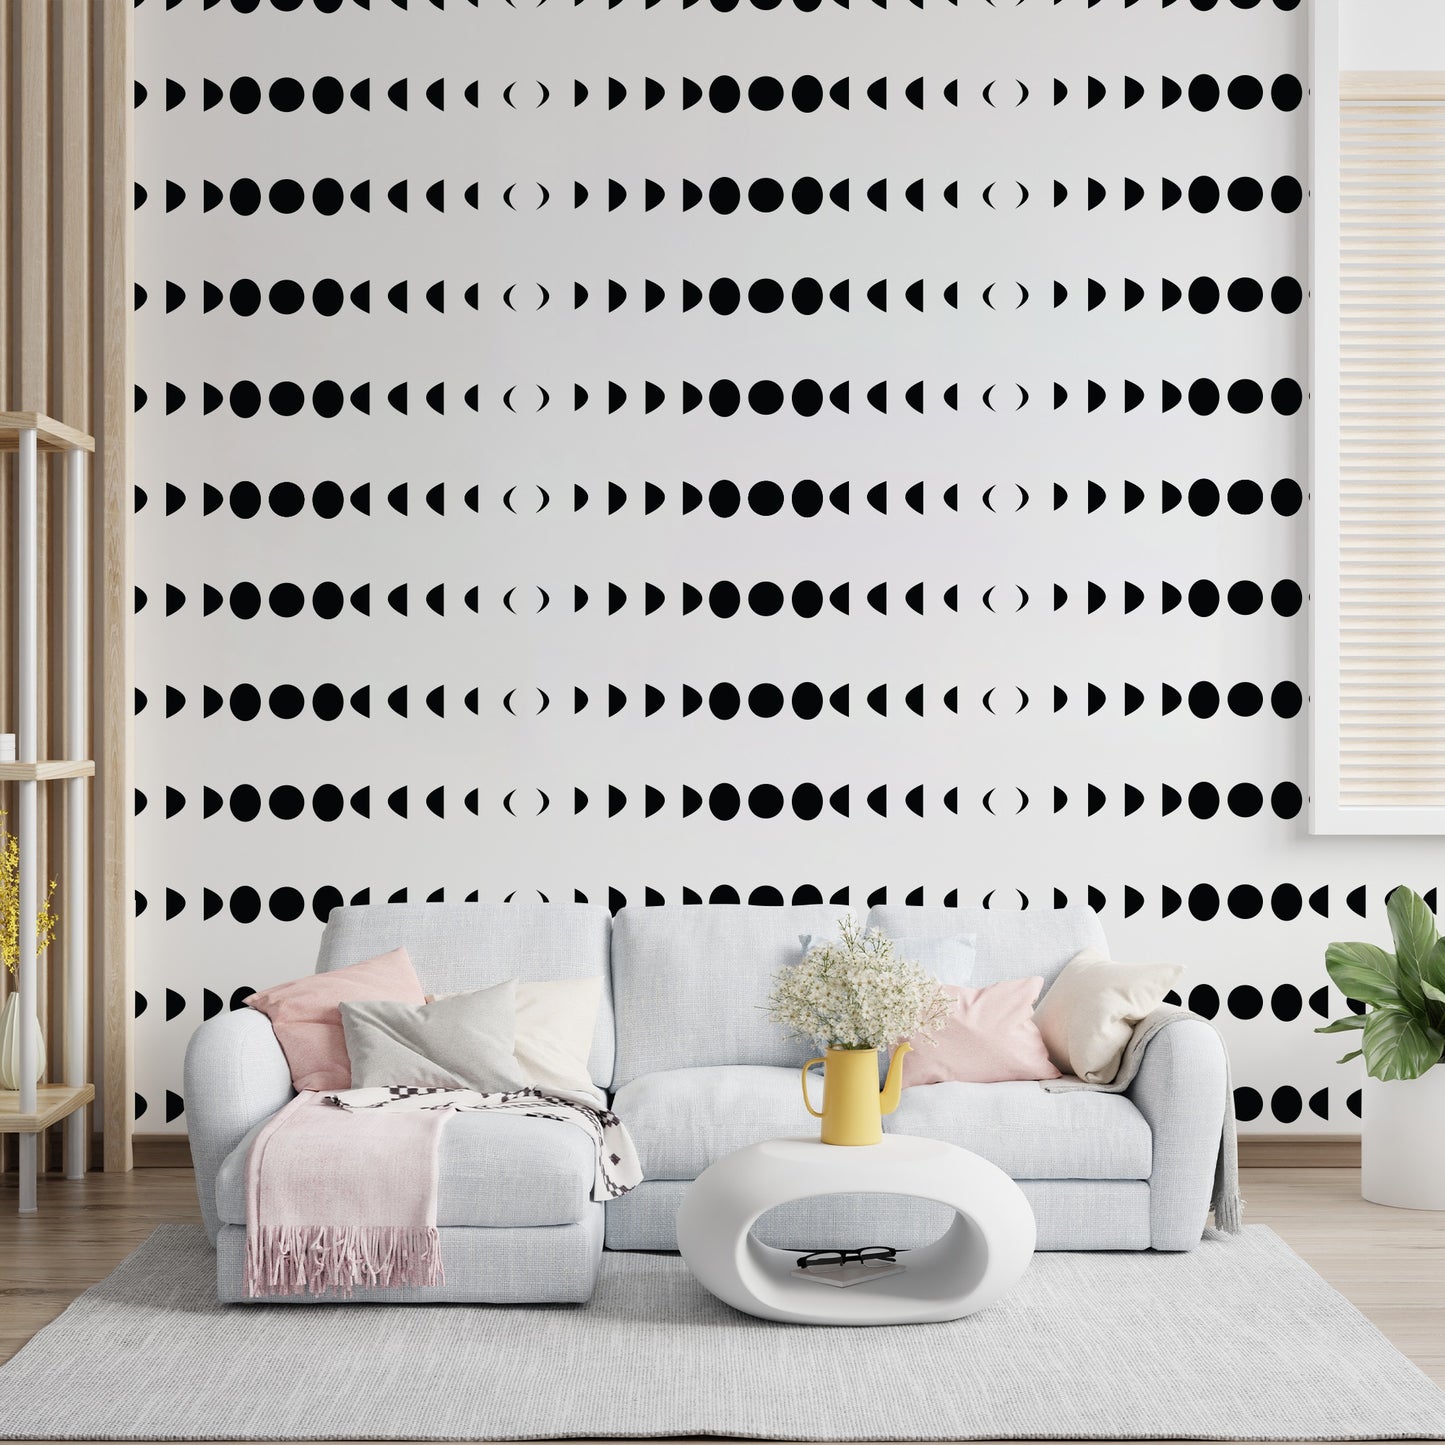 Oreo Moon Phases Design Stencil for Wall Painting (KDMD1457)